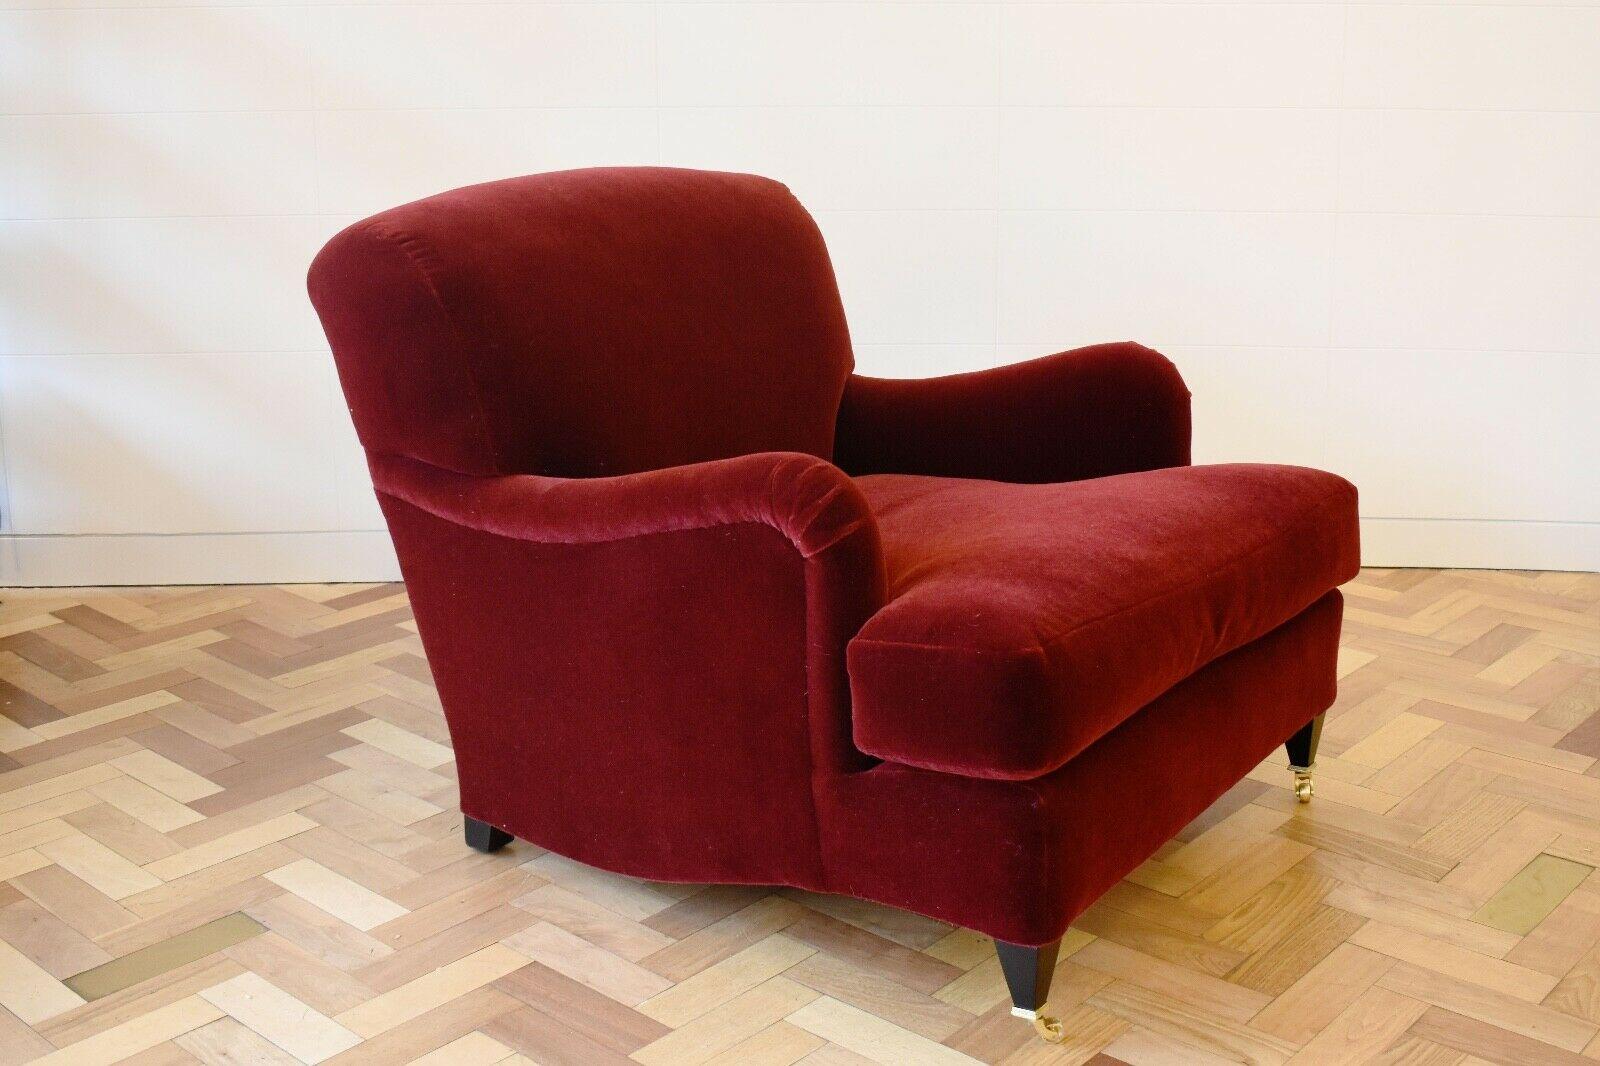 A beautiful handmade Howard style armchair upholstered in a deep red Mohair velvet. 

As well as selling antique and vintage furniture we also offer a small range of handmade pieces.This piece has been handmade in the UK by our team of skilled